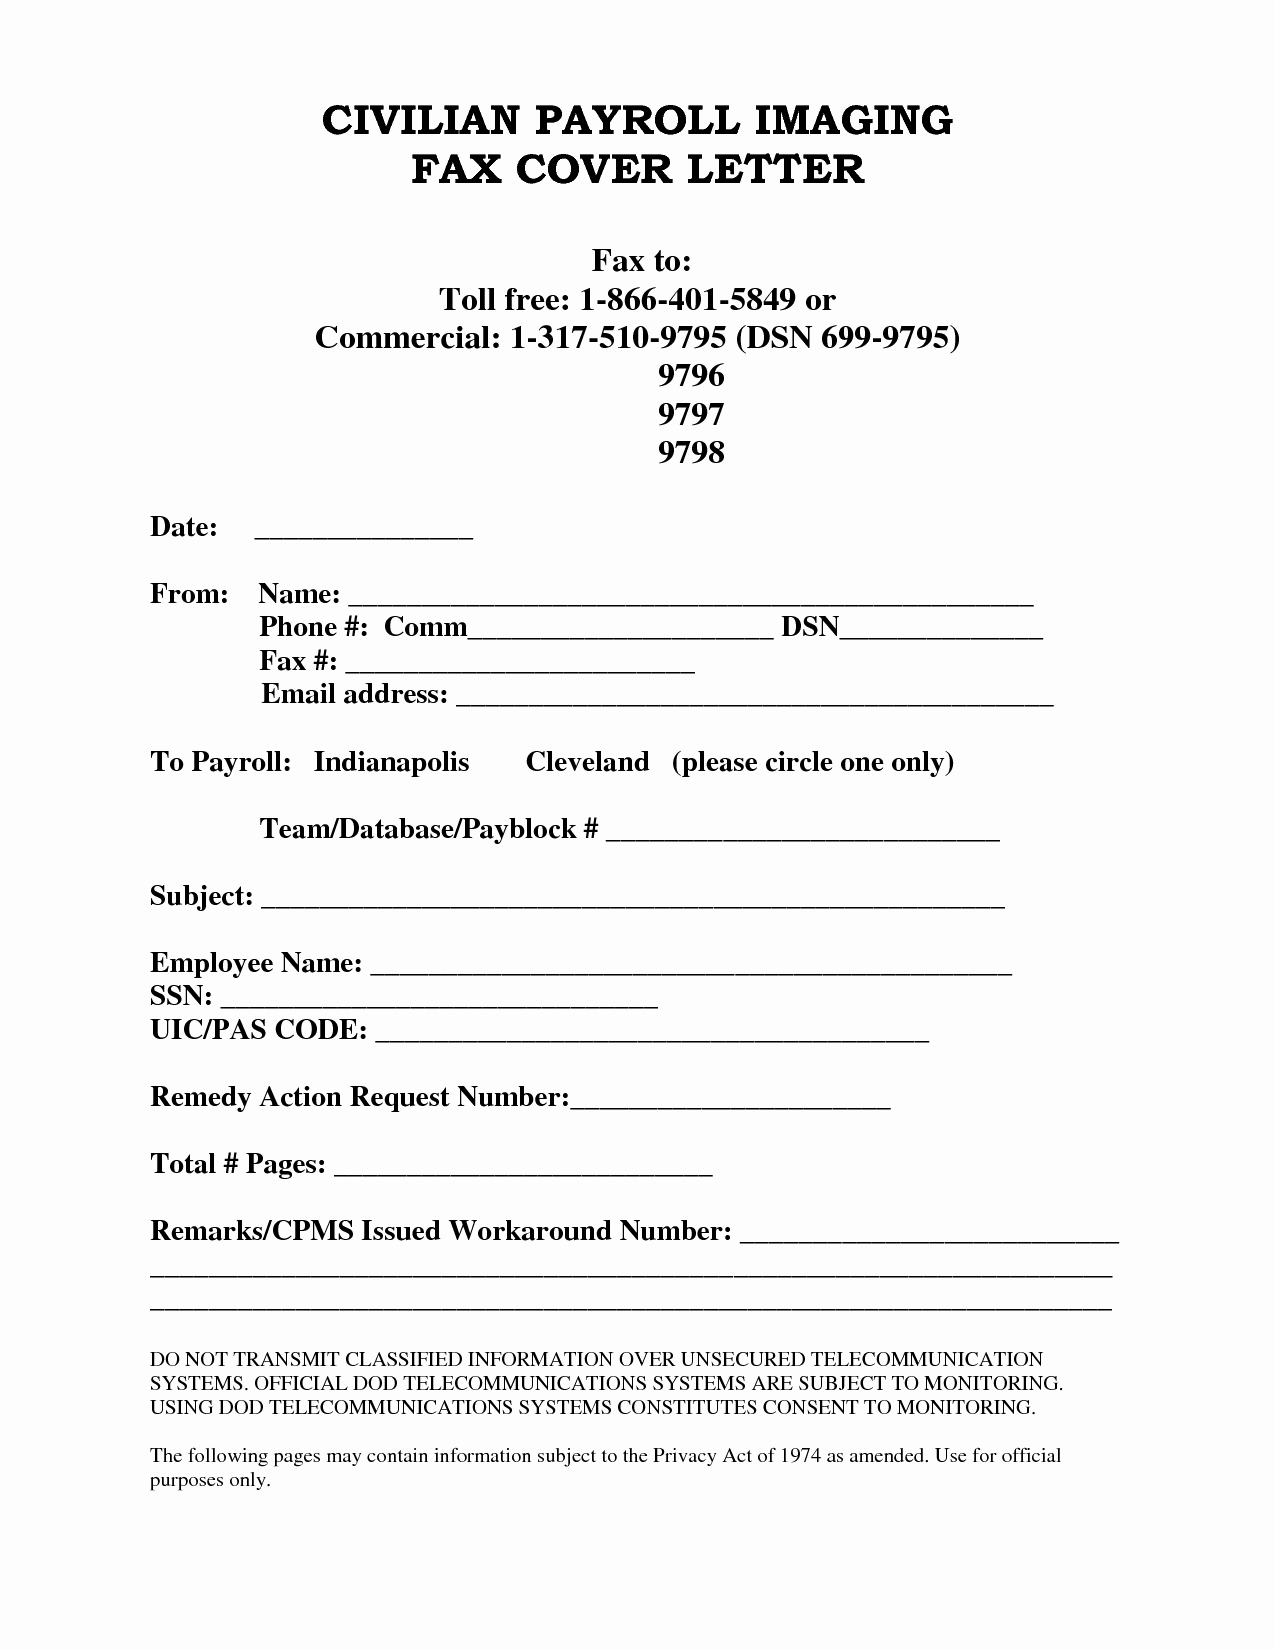 Sample Of Fax Cover Sheet New Faxing A Resume